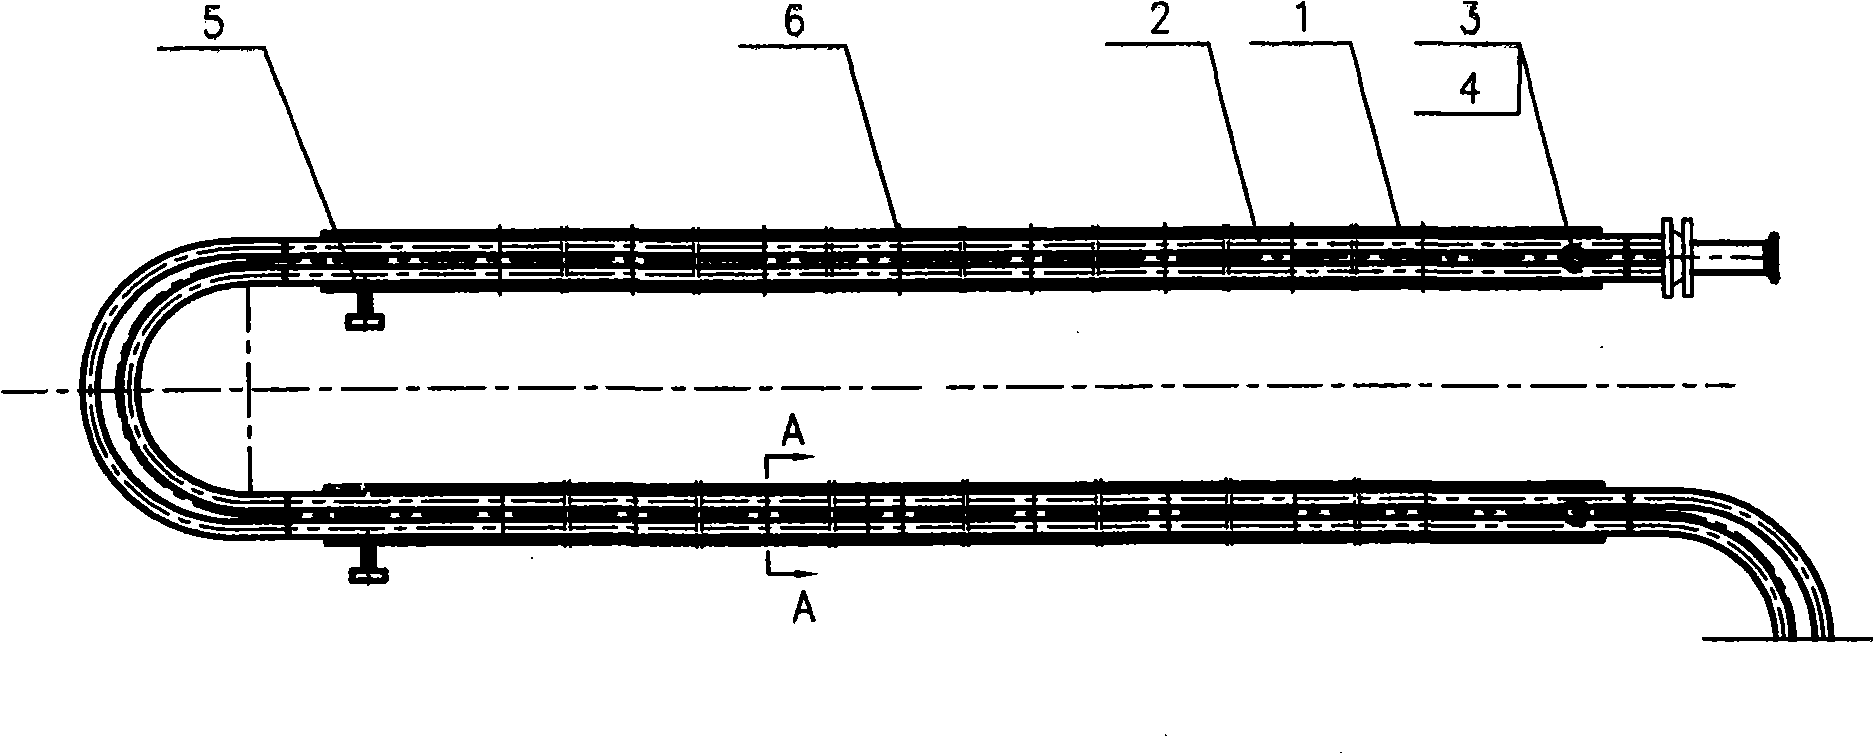 Star shaped casing tube preheater for large-scale canalization dissolving out apparatus